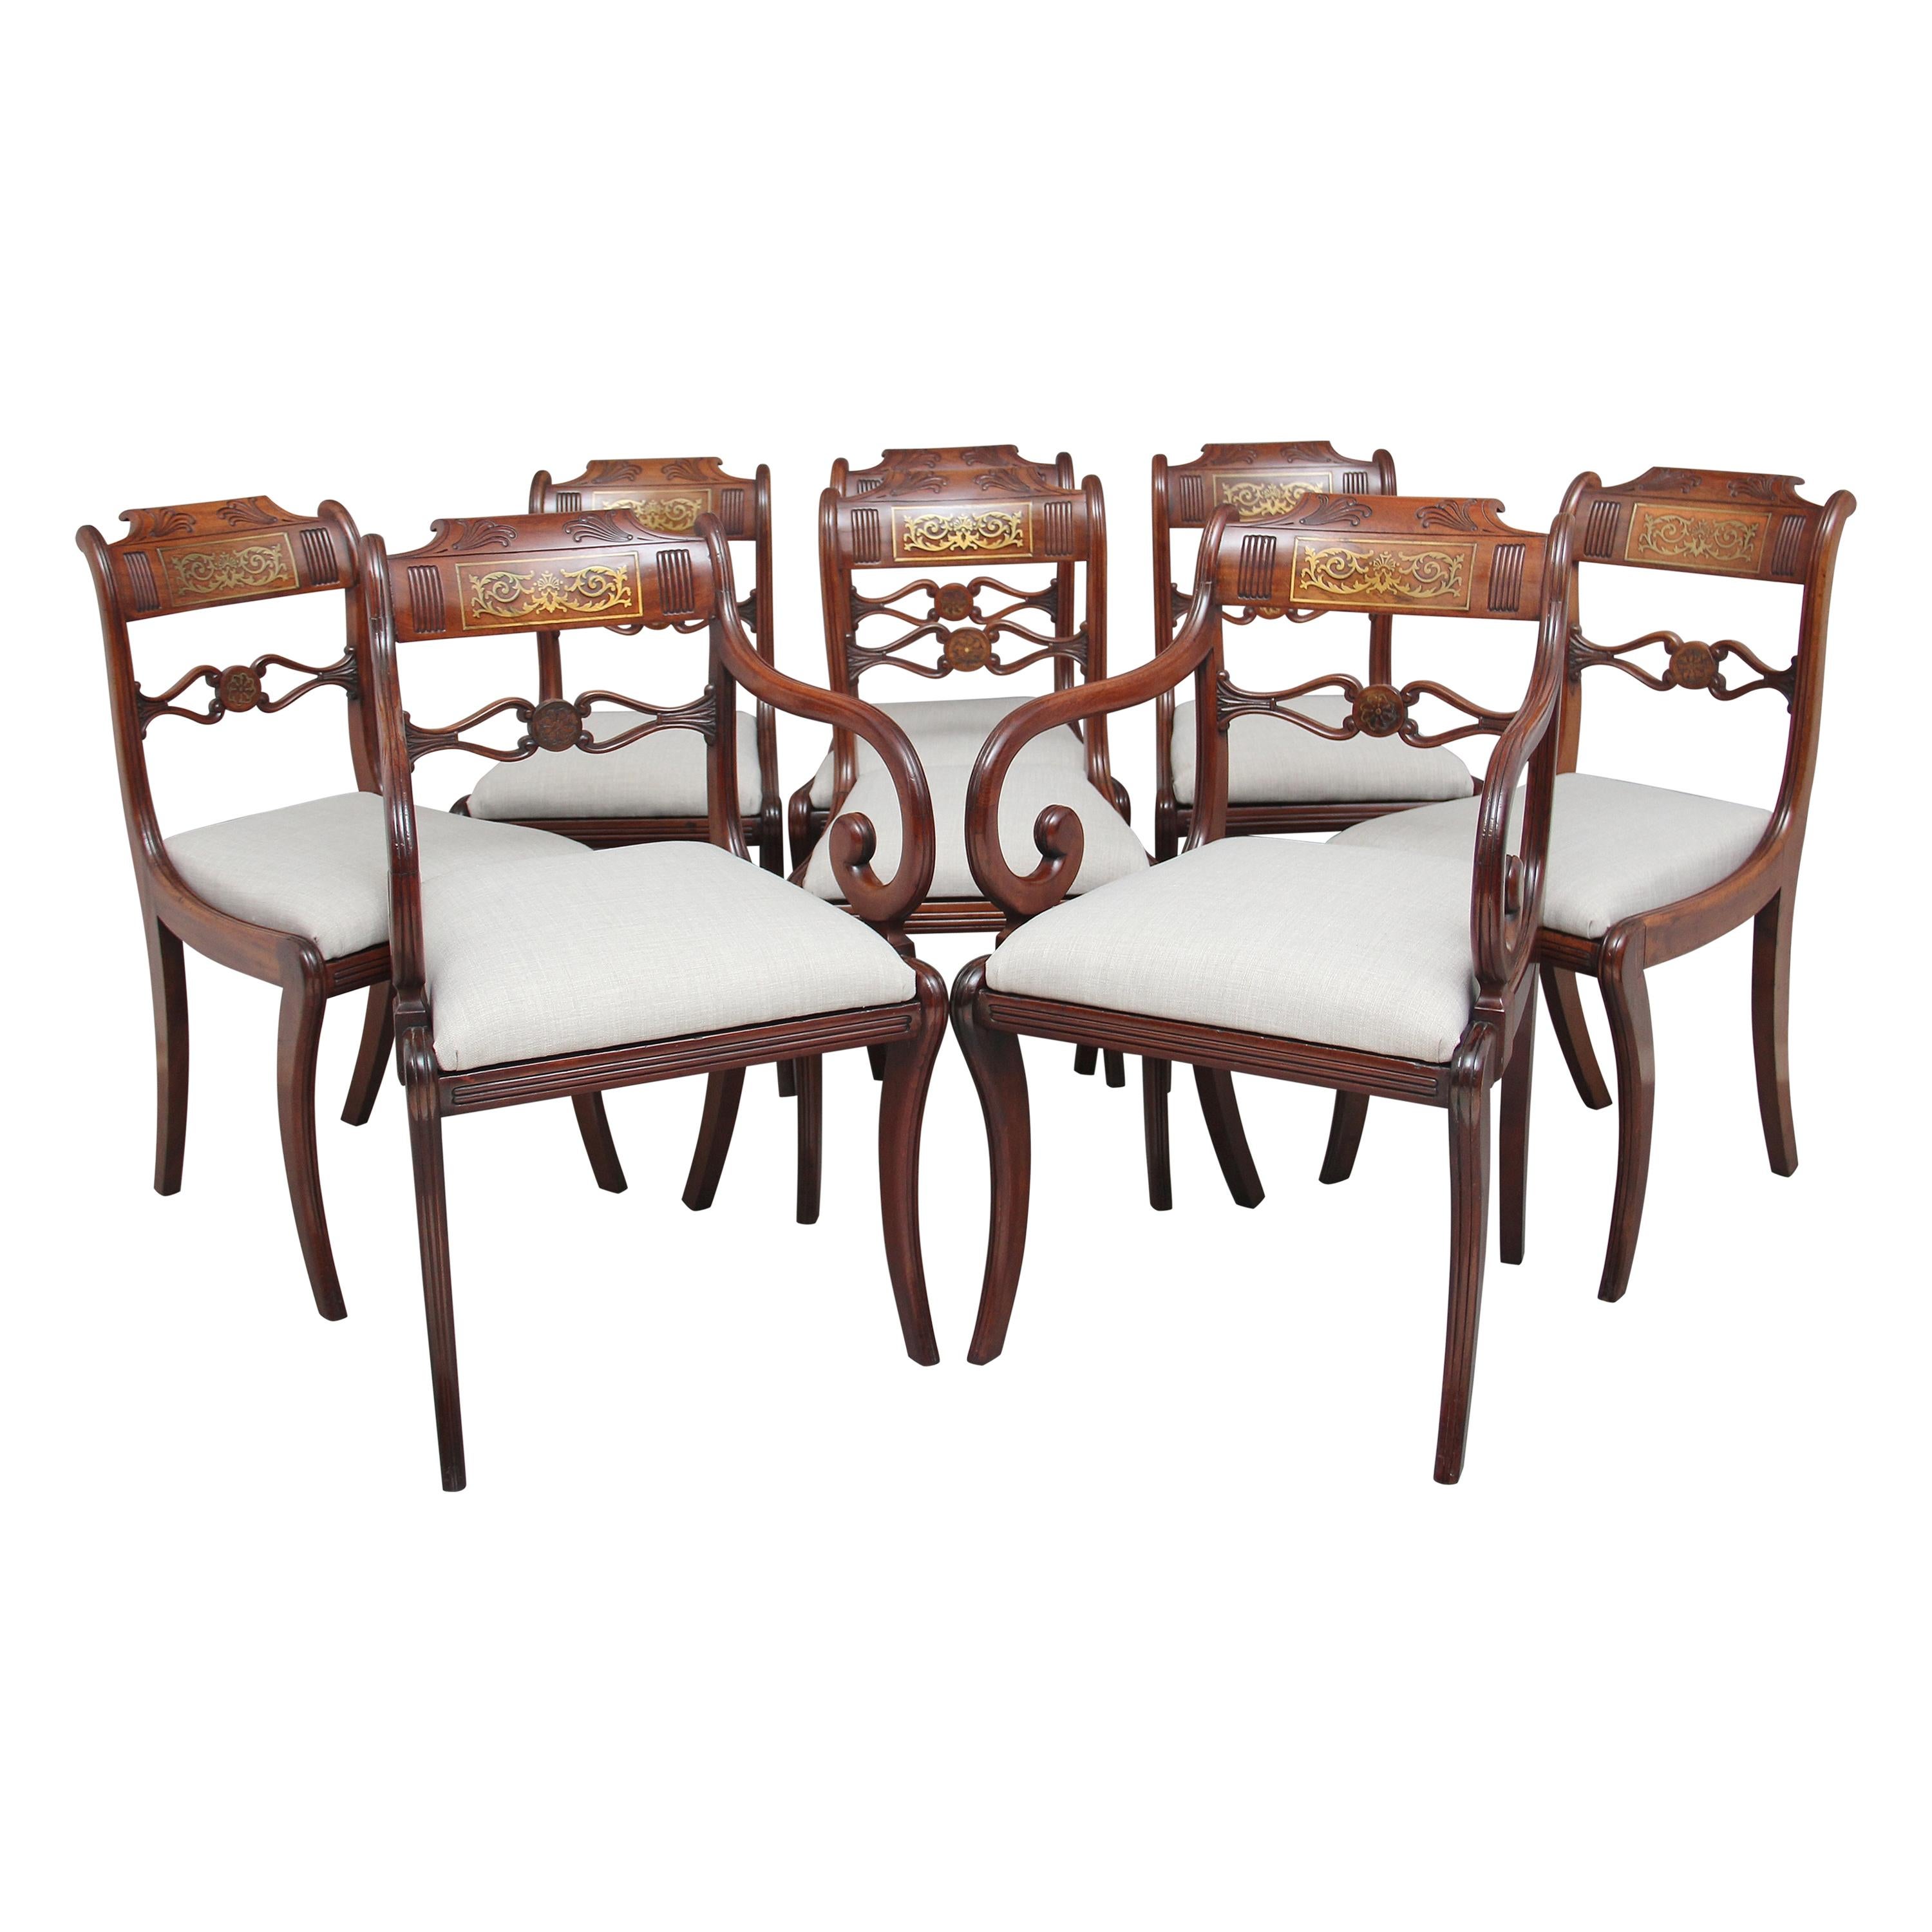 Set of Eight Regency Mahogany and Brass Inlaid Dining Chairs